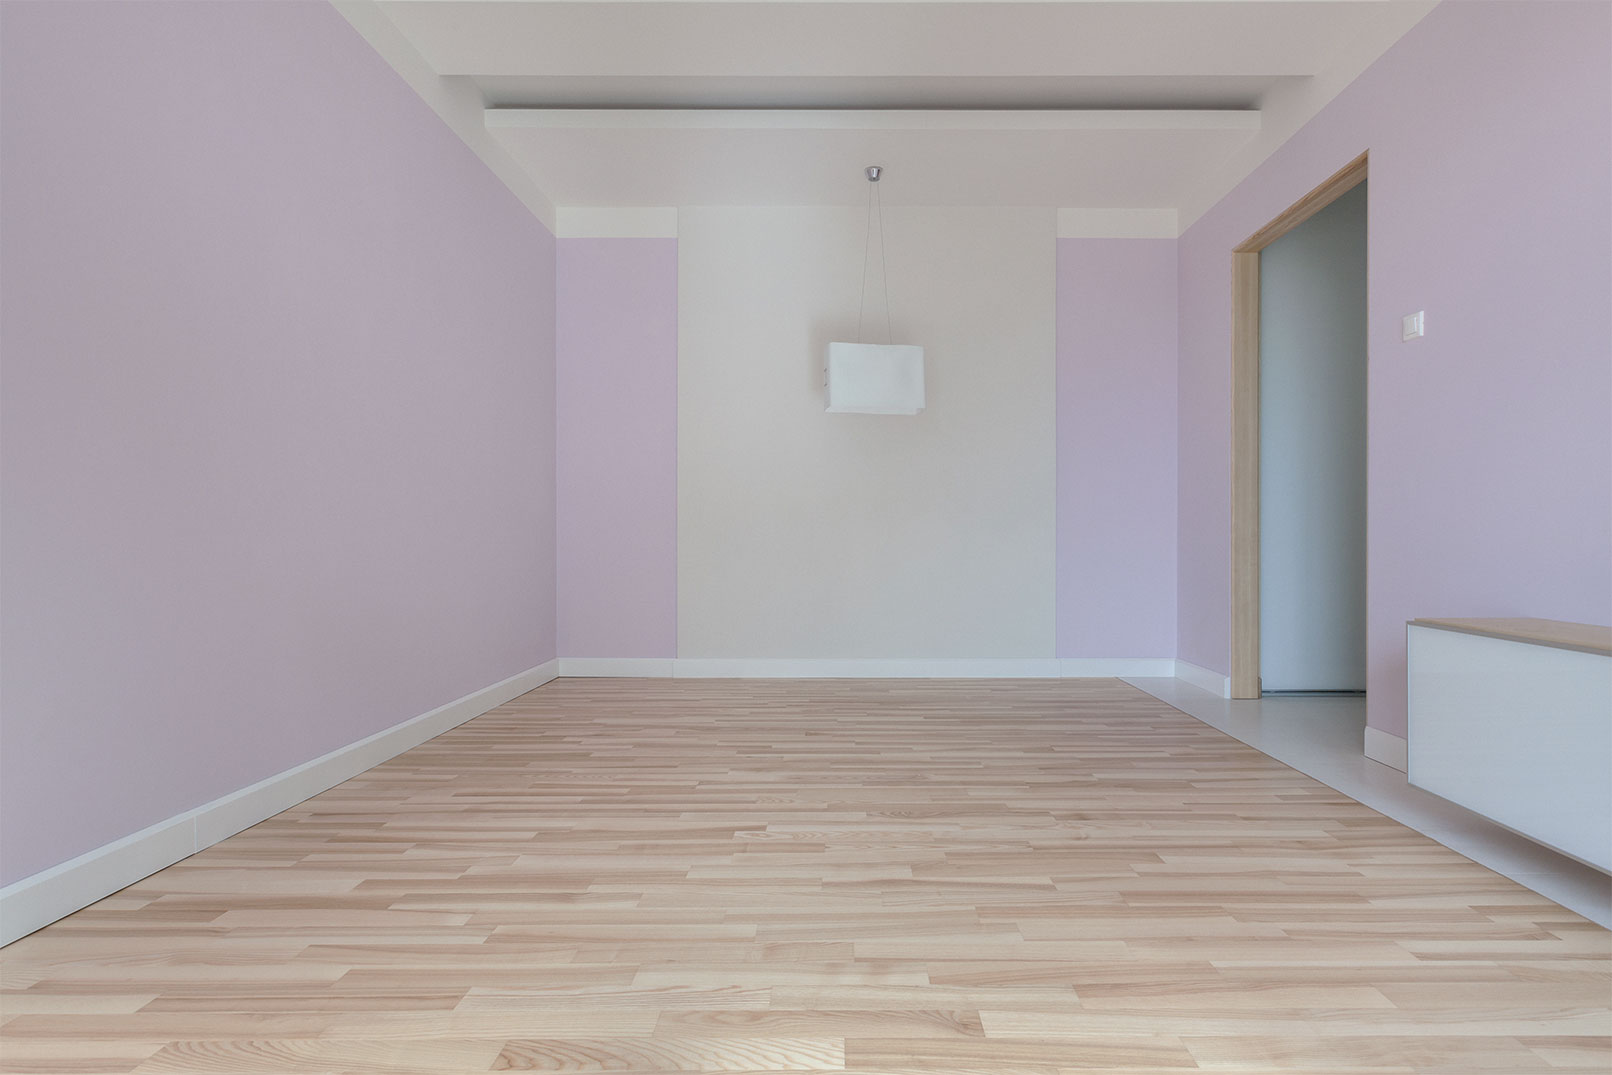 Pastel pink colored room with white trim, seashell colored ceiling and light wooden floor.